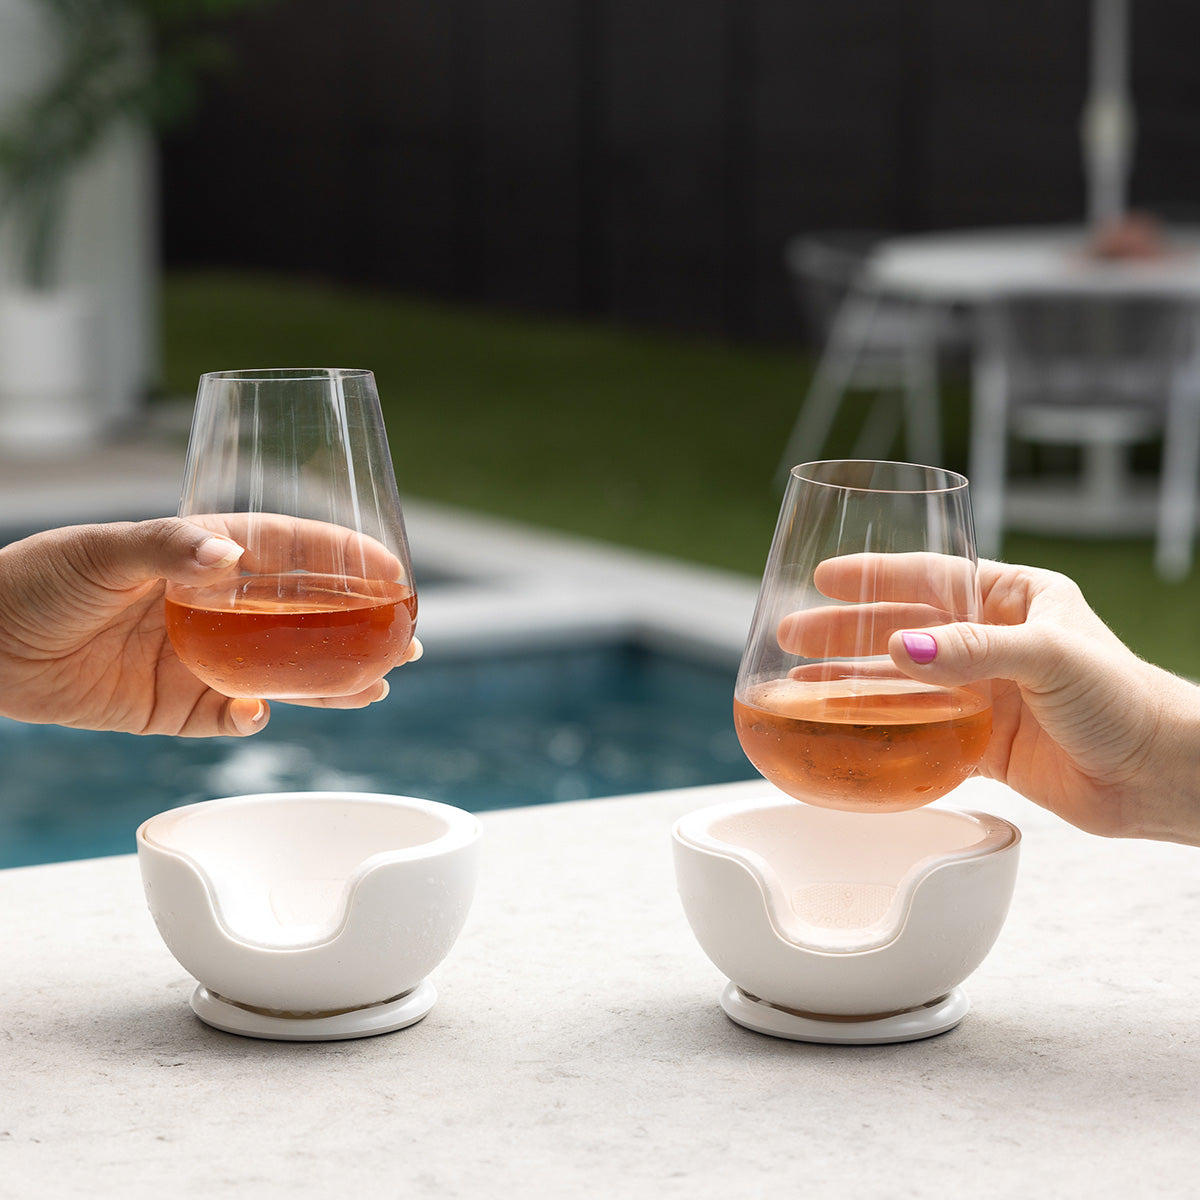 Stemless Martini Glasses with Chiller Set of 2